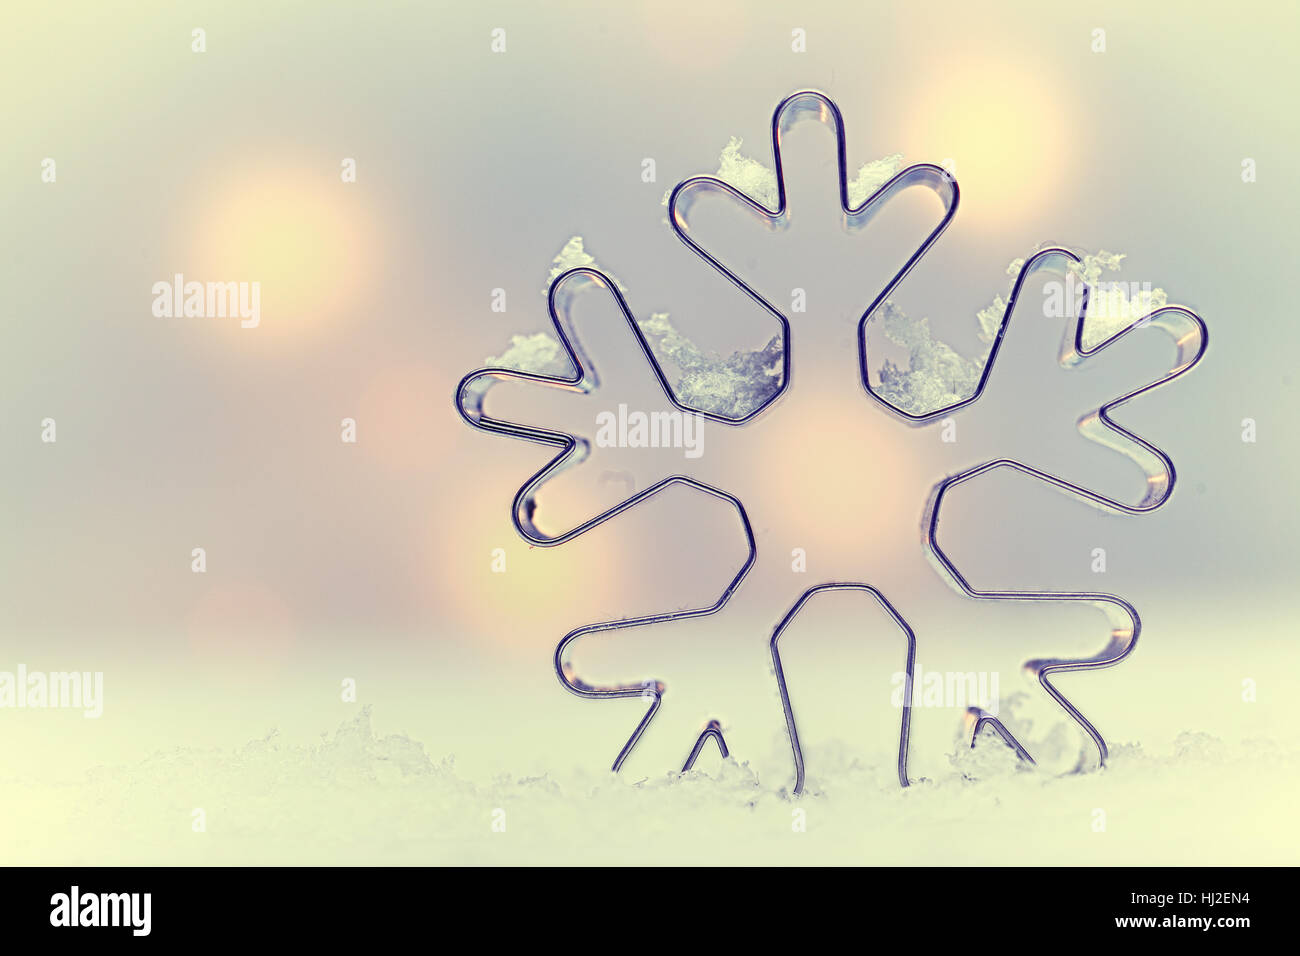 greeting, holiday, emotional, winter, lights, new, snow, coke, cocaine, Stock Photo